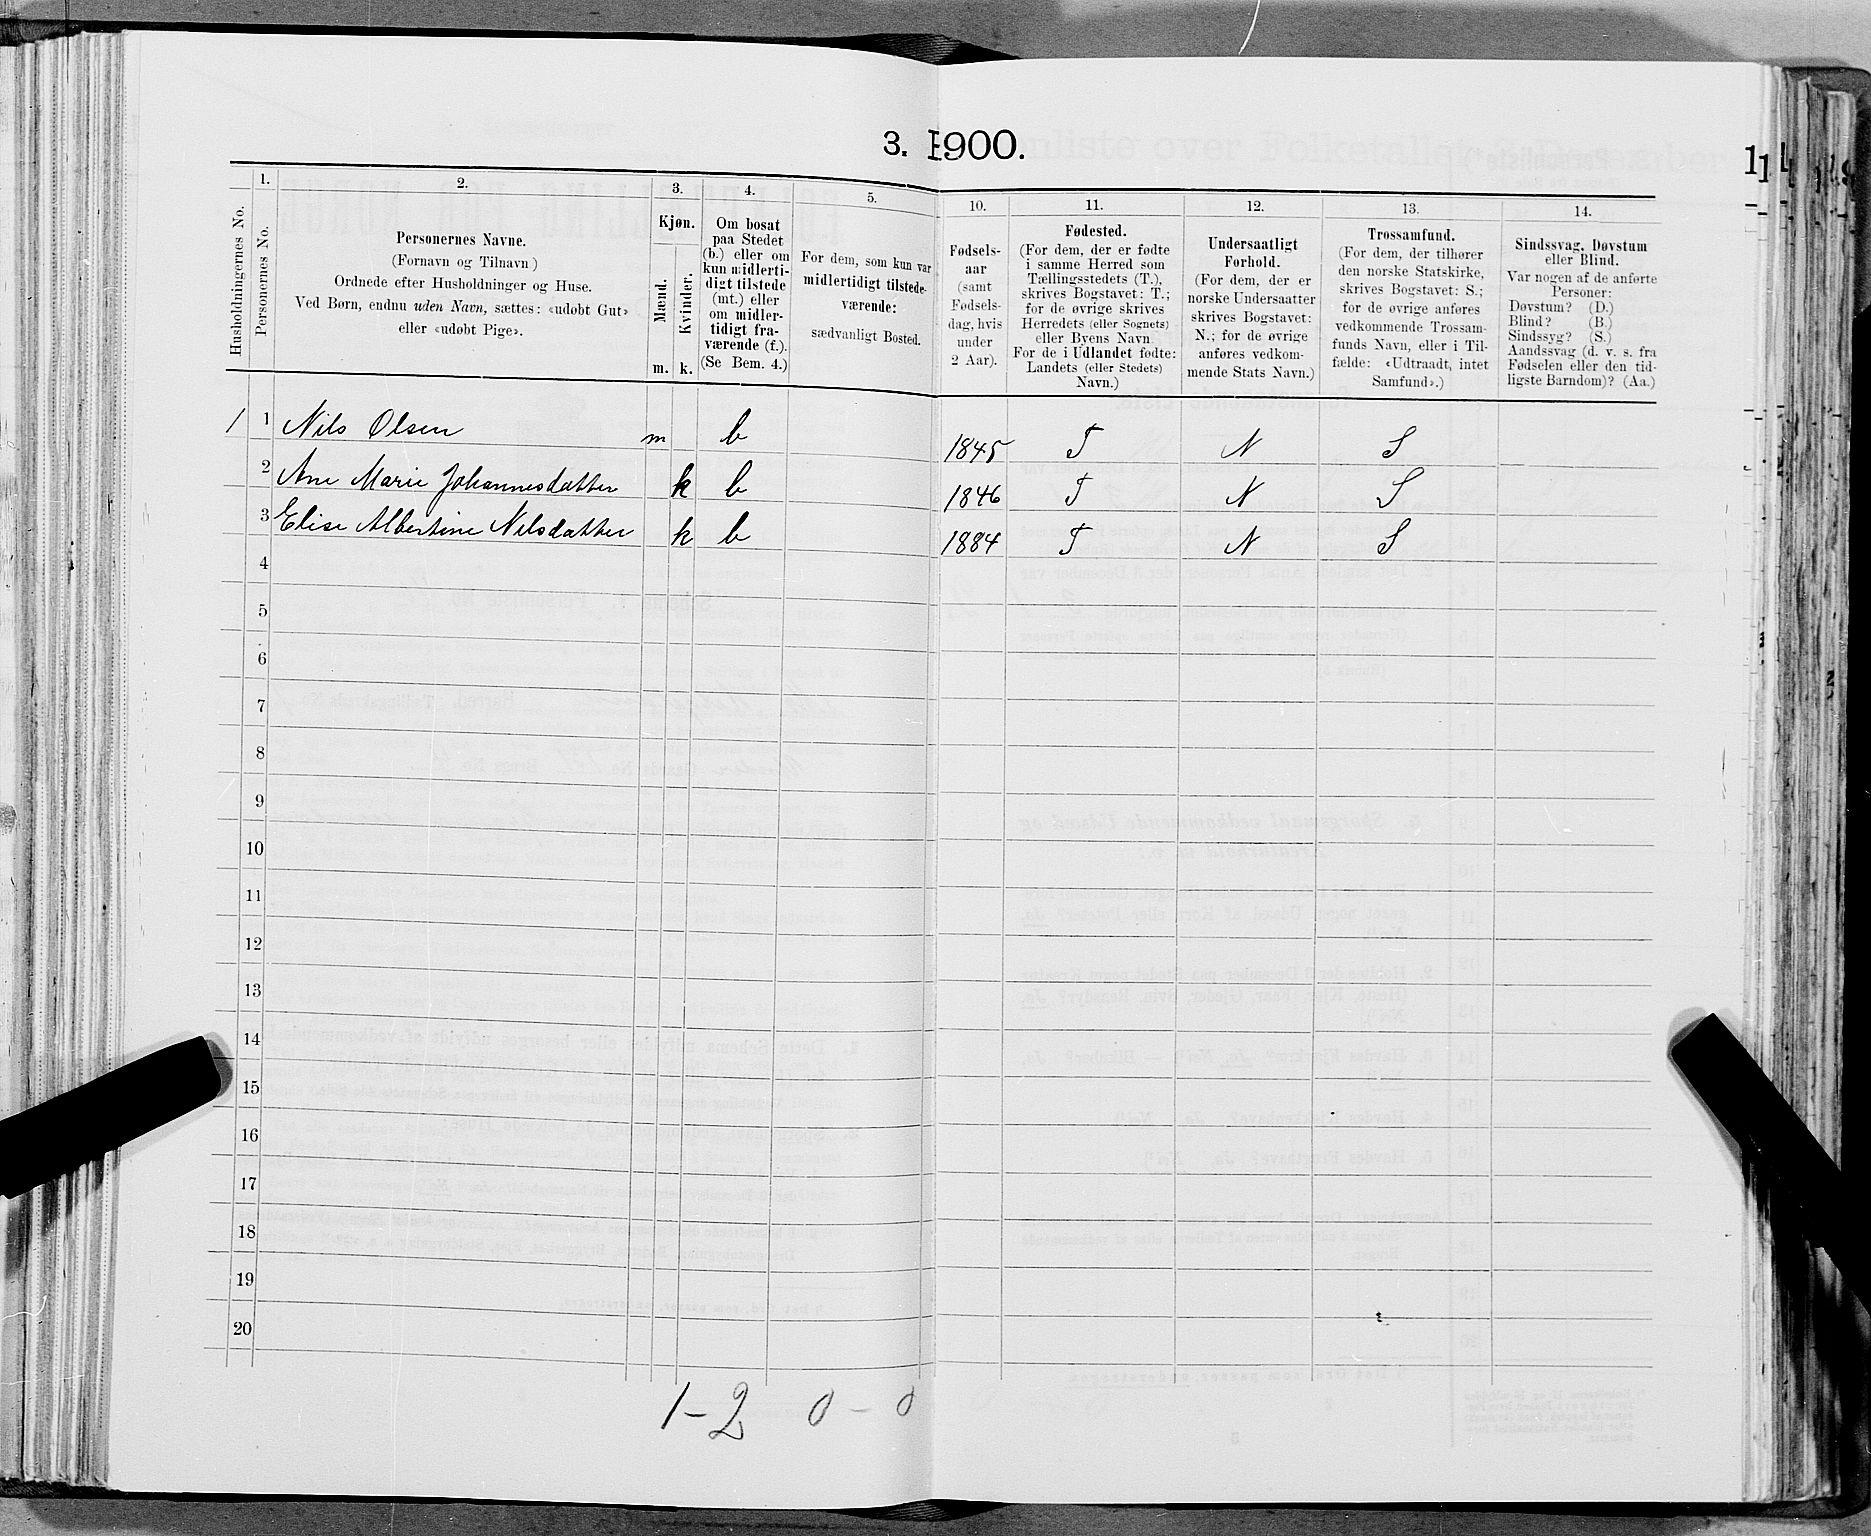 SAT, 1900 census for Mo, 1900, p. 1071